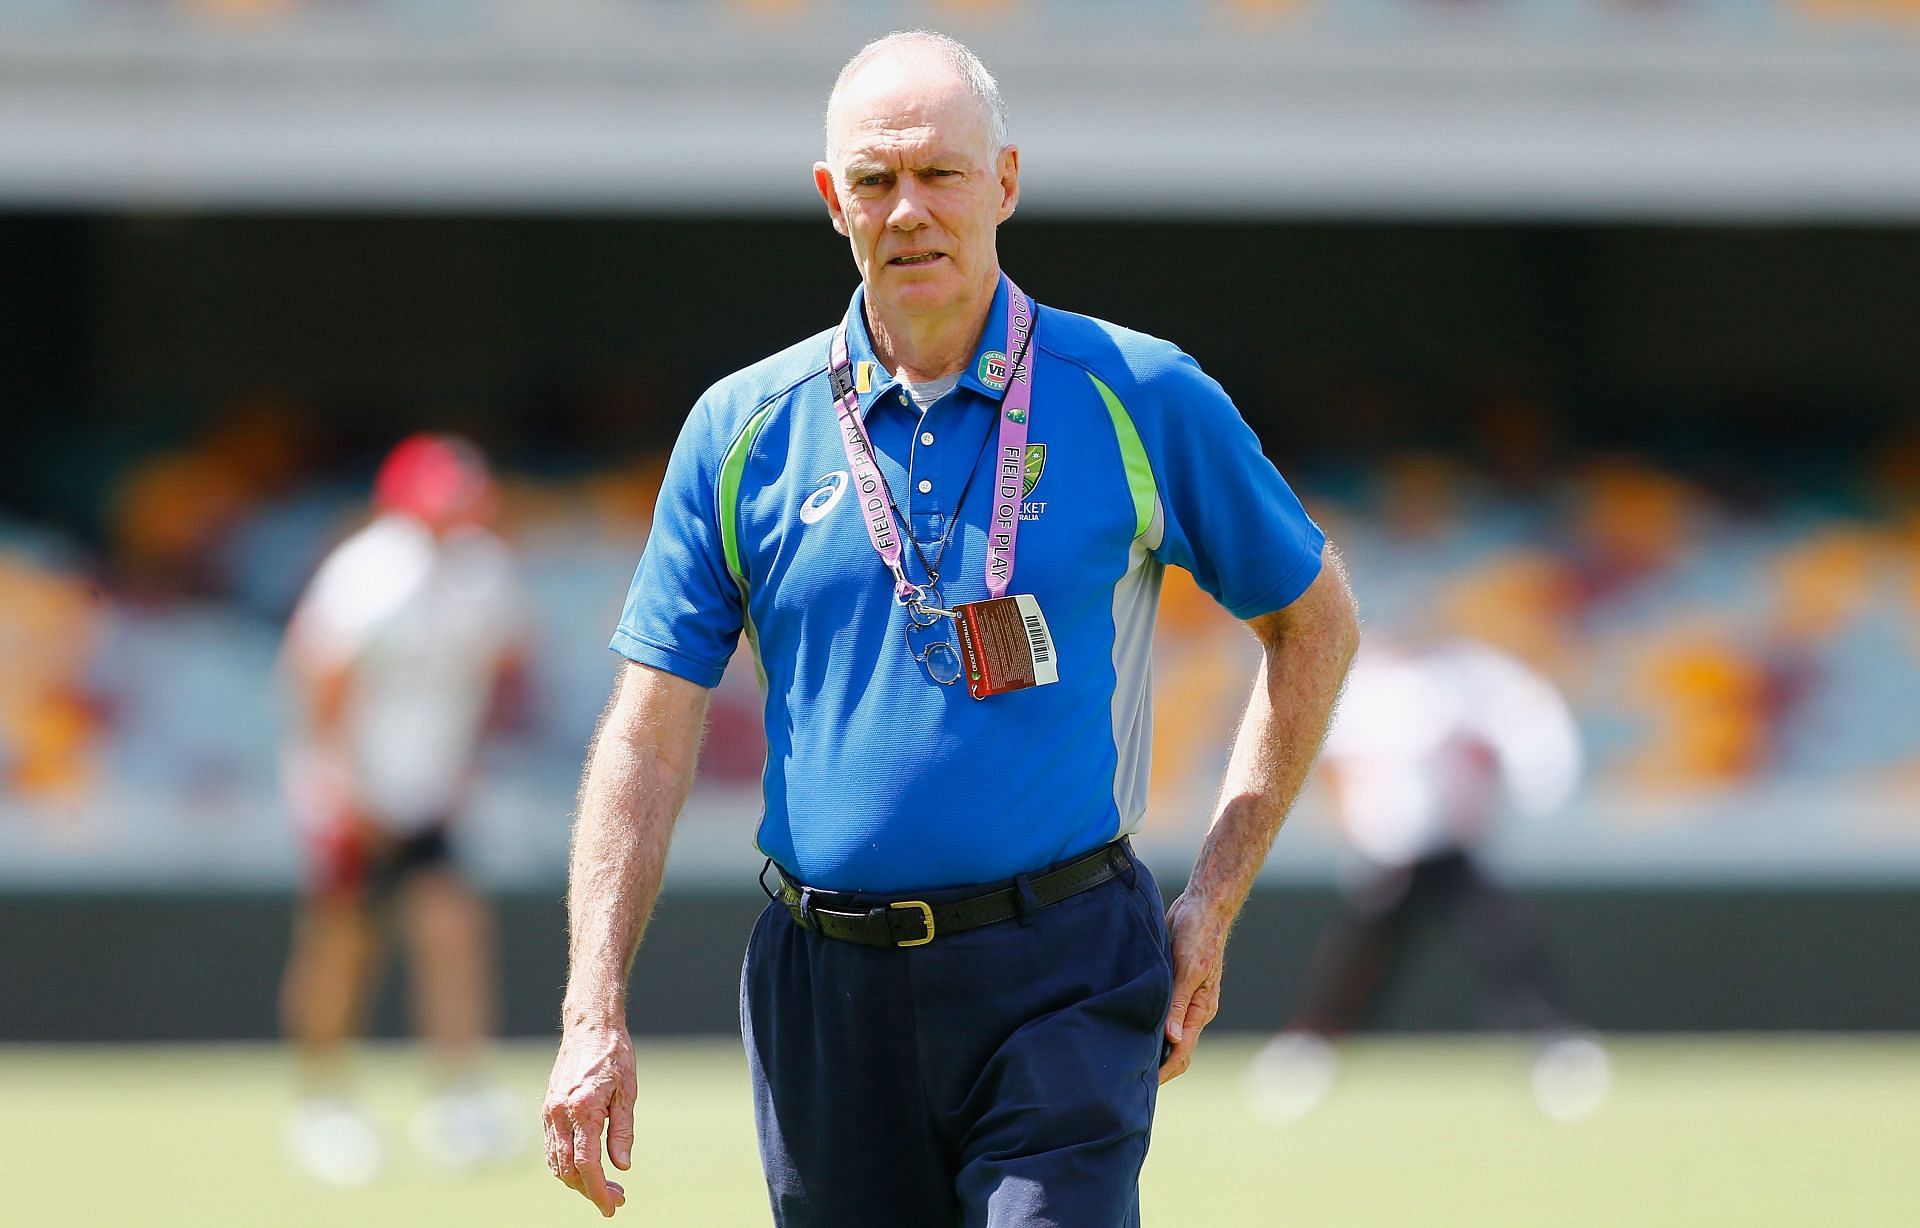 Greg Chappell. (Image Credits: Getty)